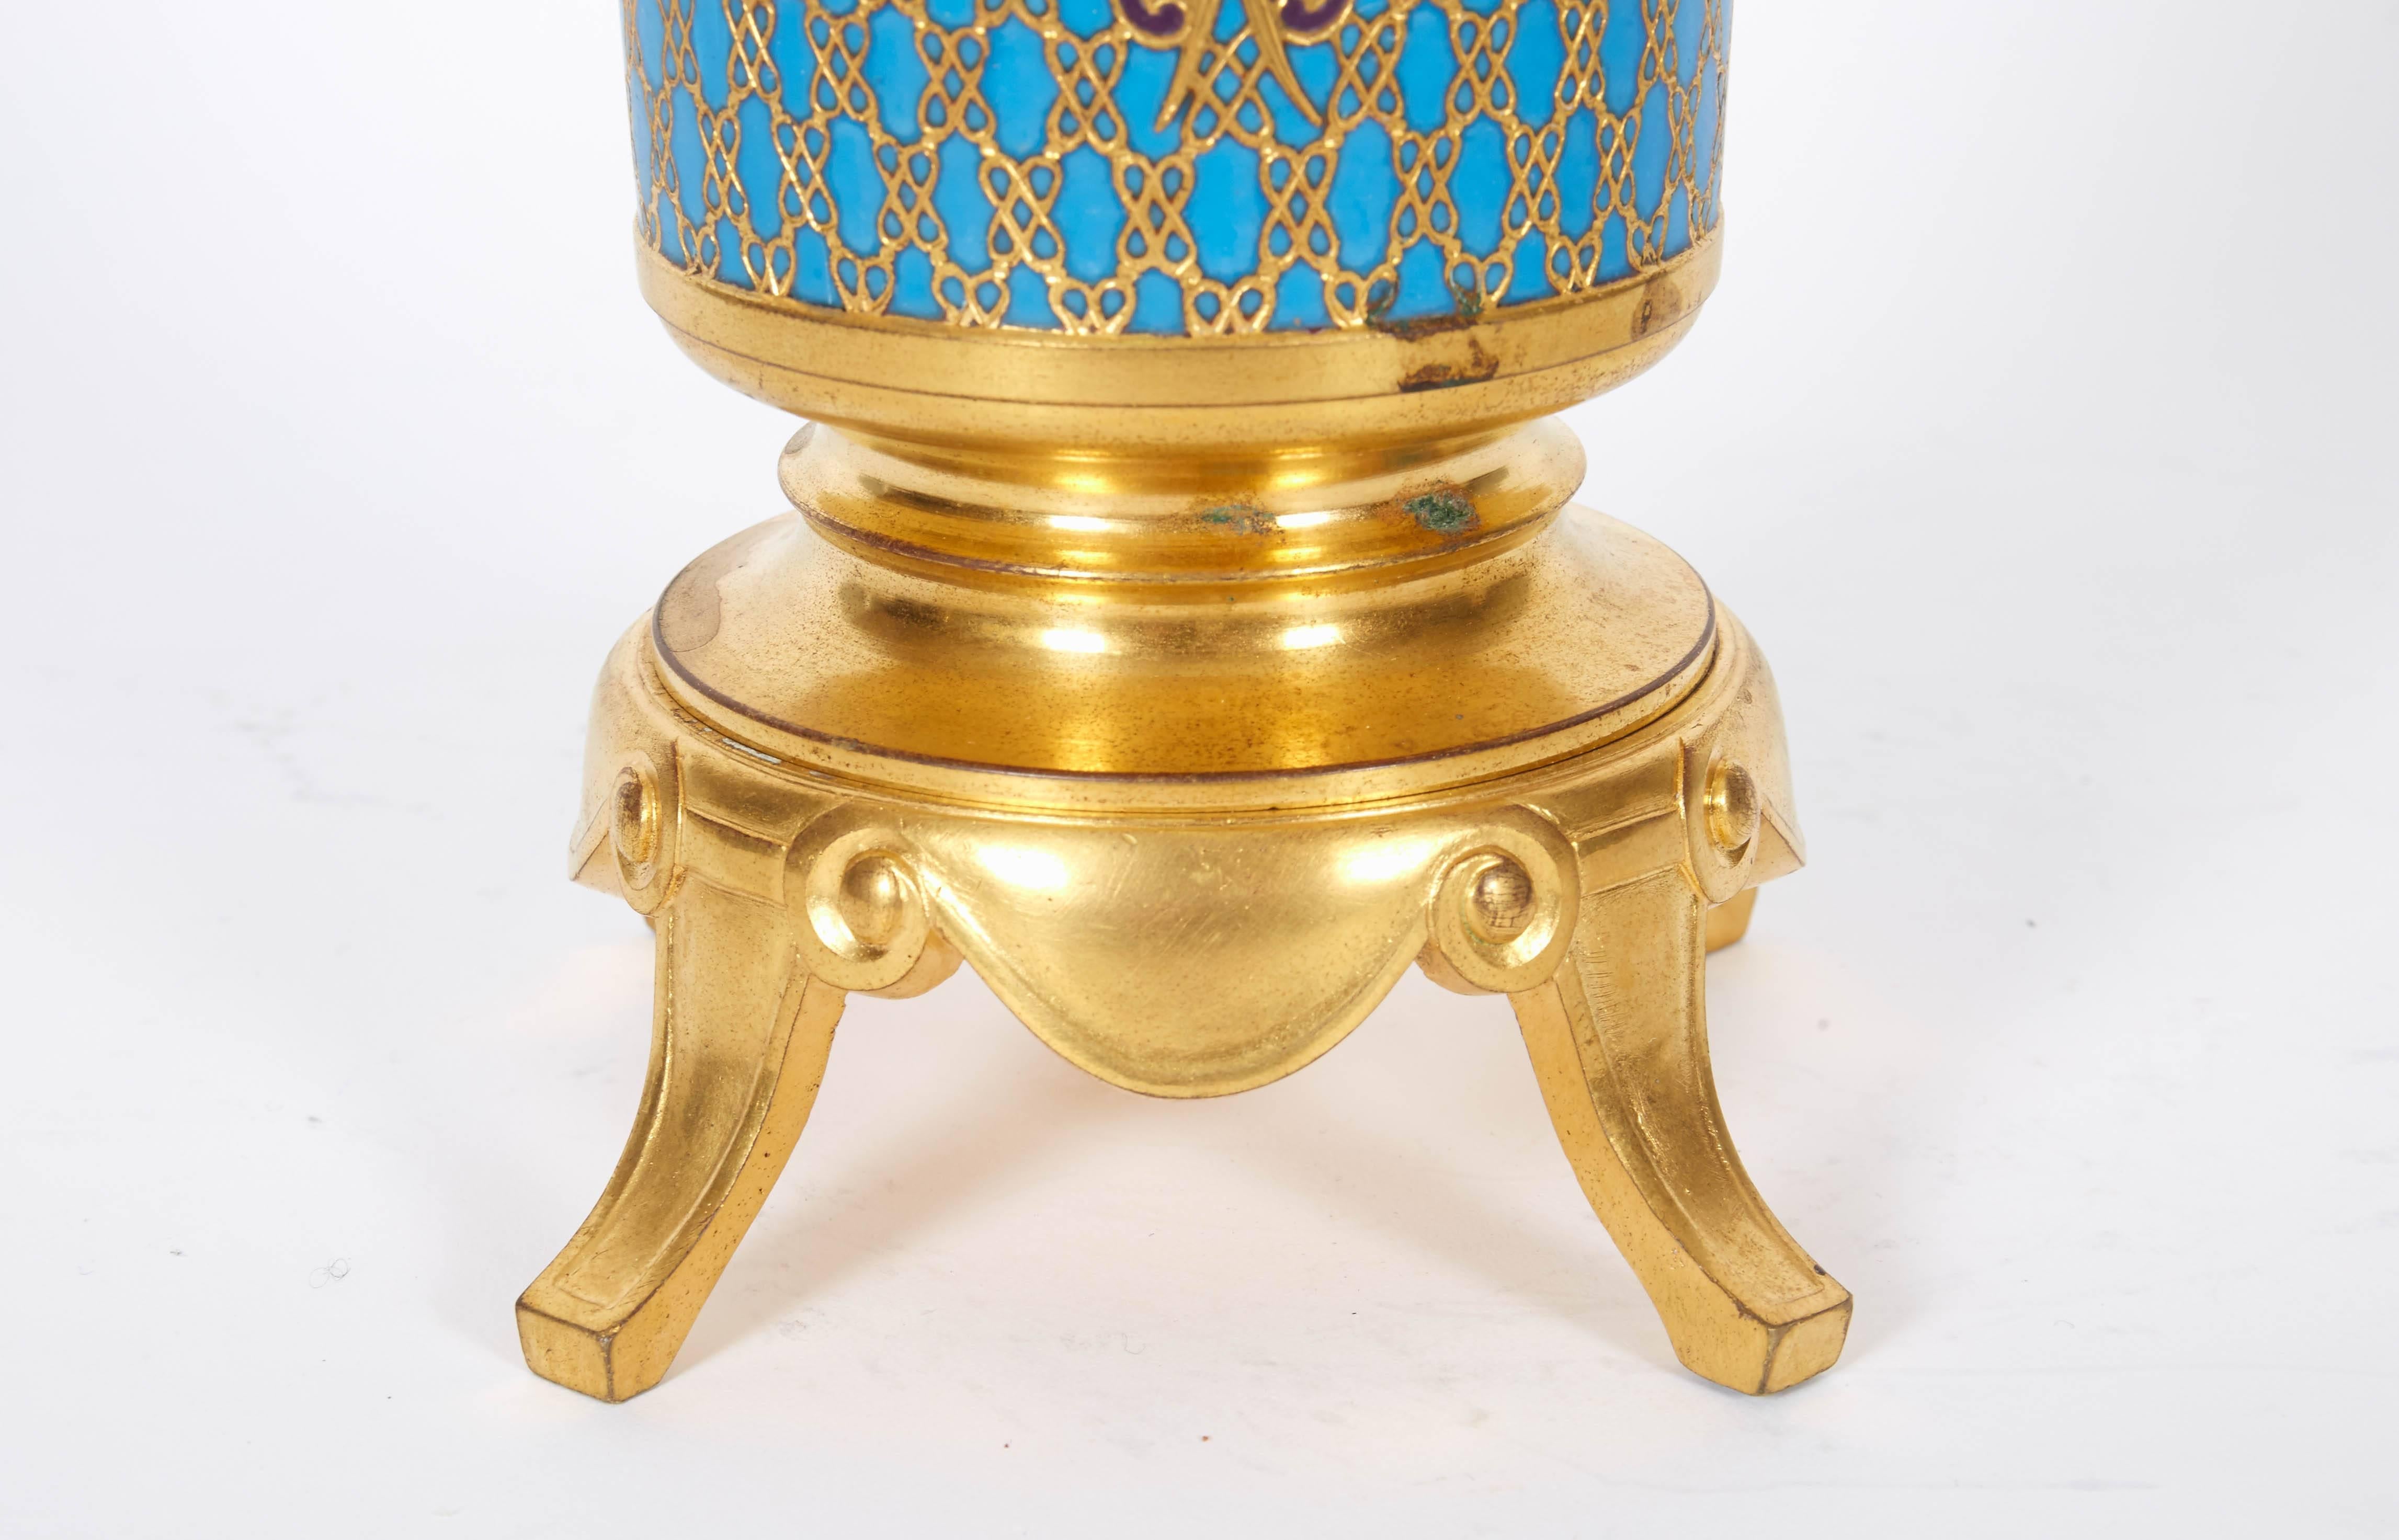 Napoleon III French Gilt Bronze and Champleve Cloisonne Enamel Vase by Ferdinand Barbedienne